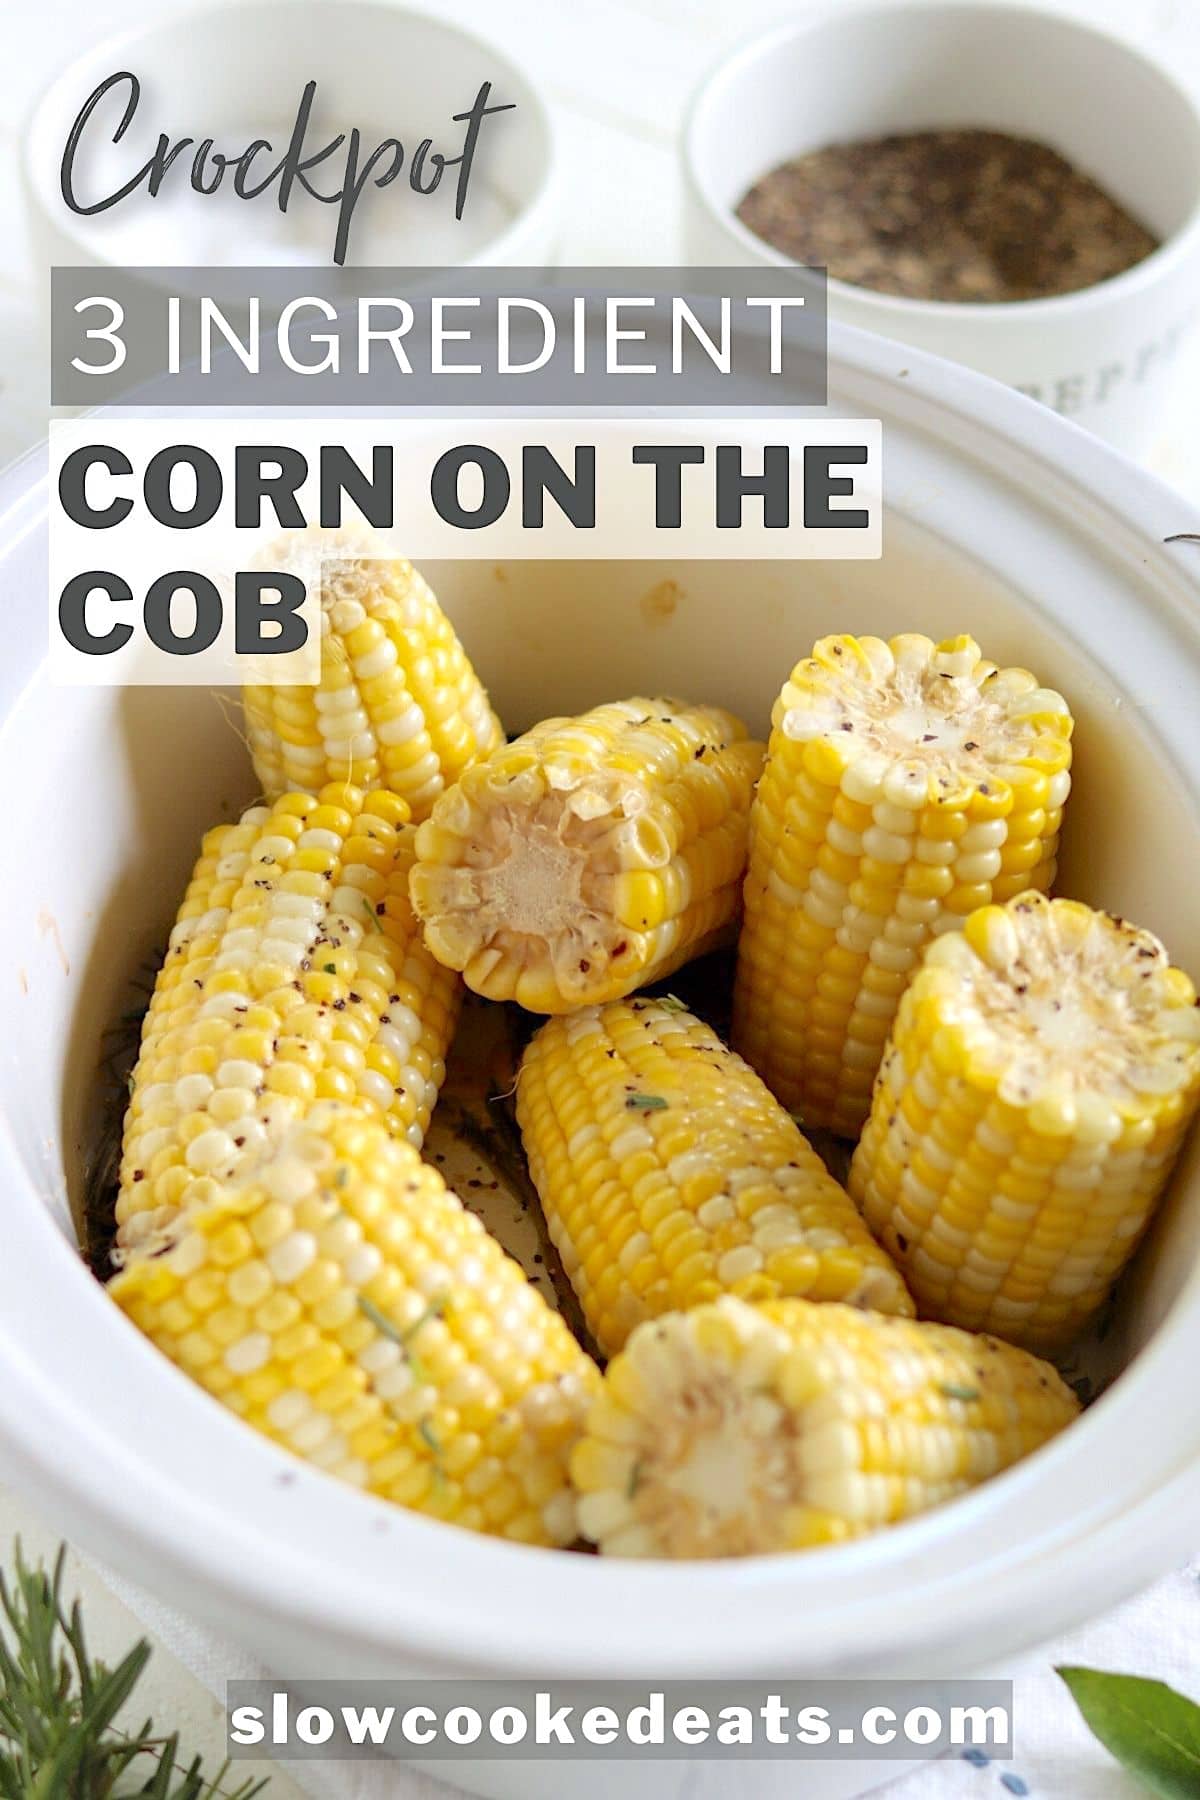 Pinterest pin of a white crockpot with yellow ears of corn.